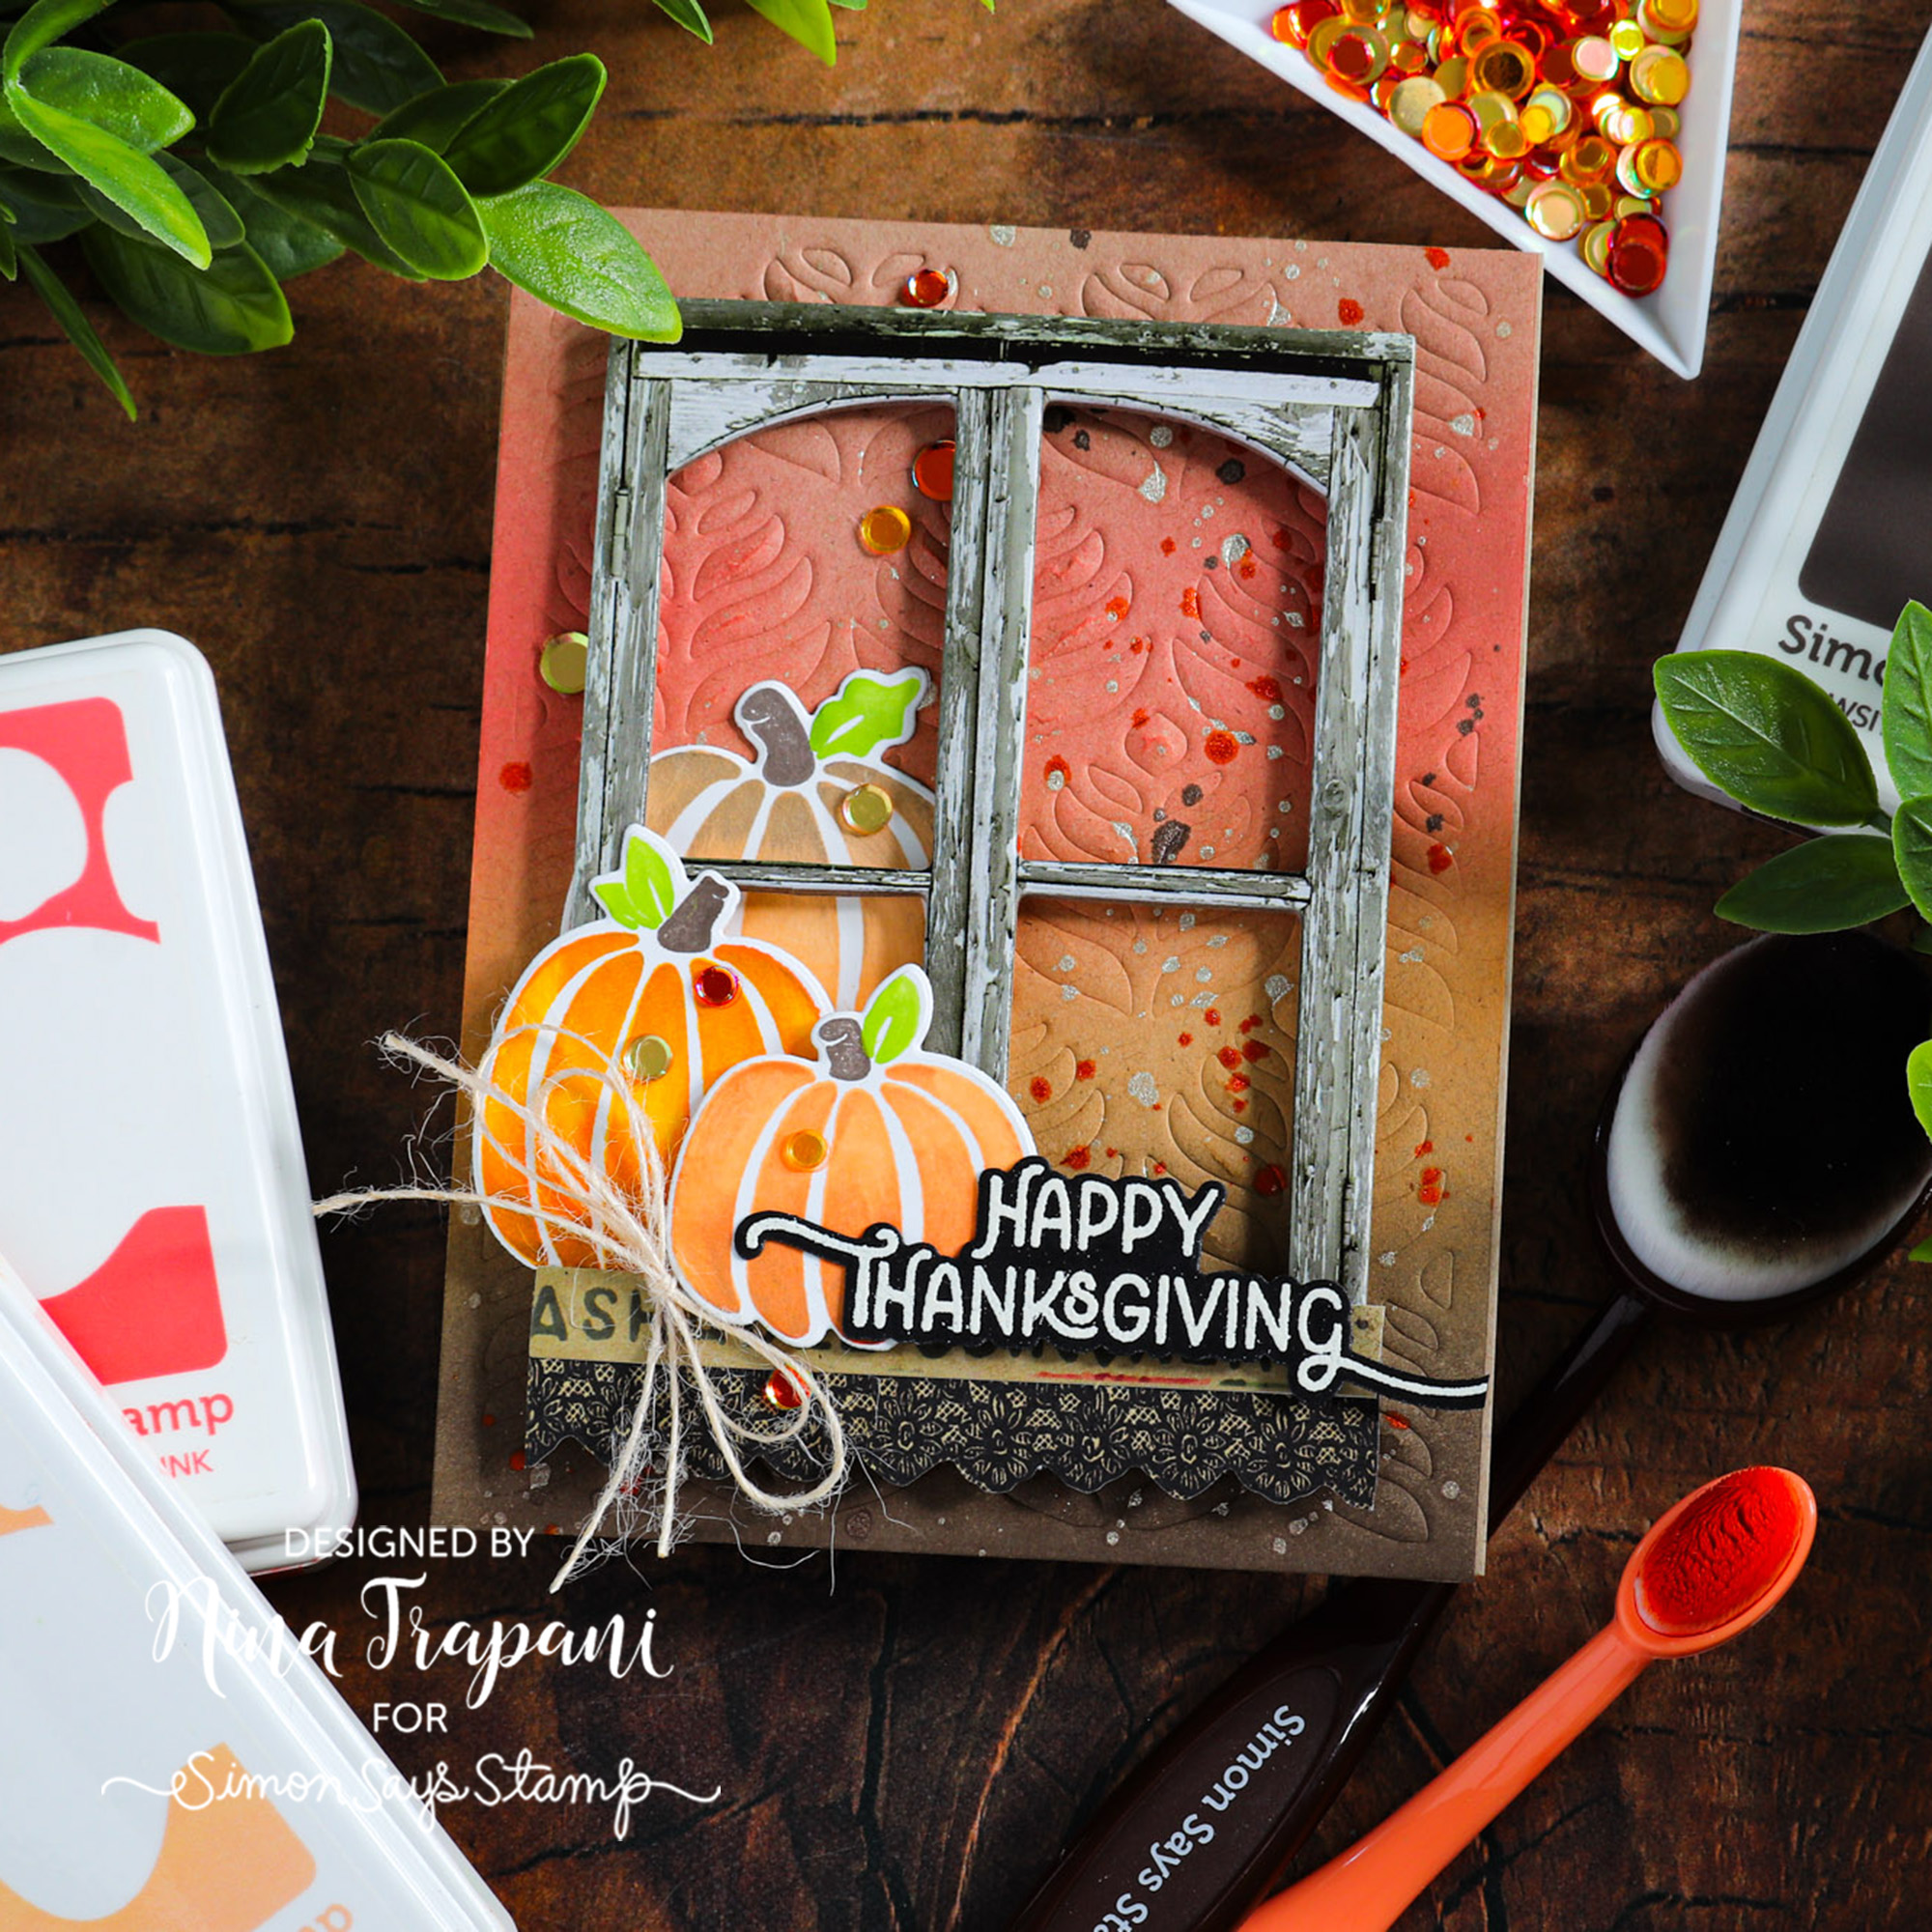 Plays Well With Paper: Tim Holtz Stamptember 2023